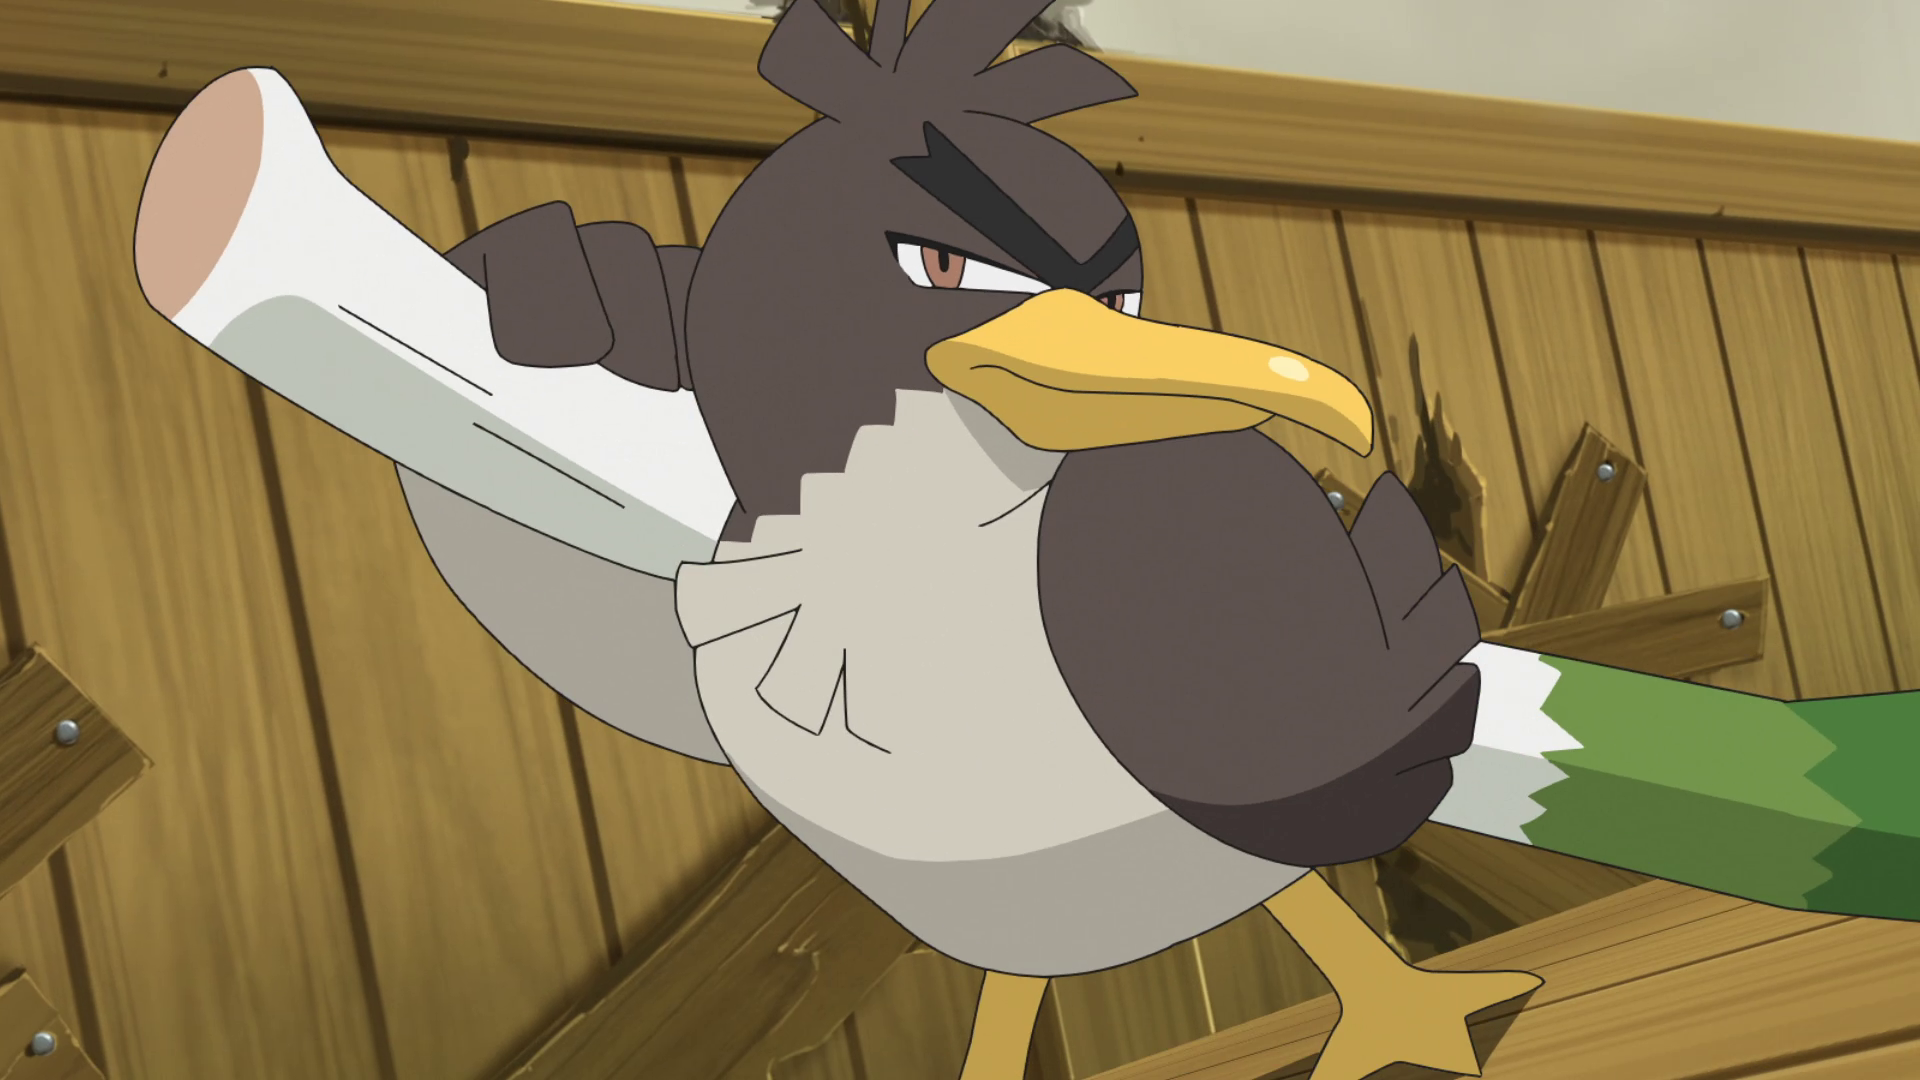 Pokémon Sword And Shield's Galarian Farfetch'd: How To Find And Evolve Into  Sirfetch'd